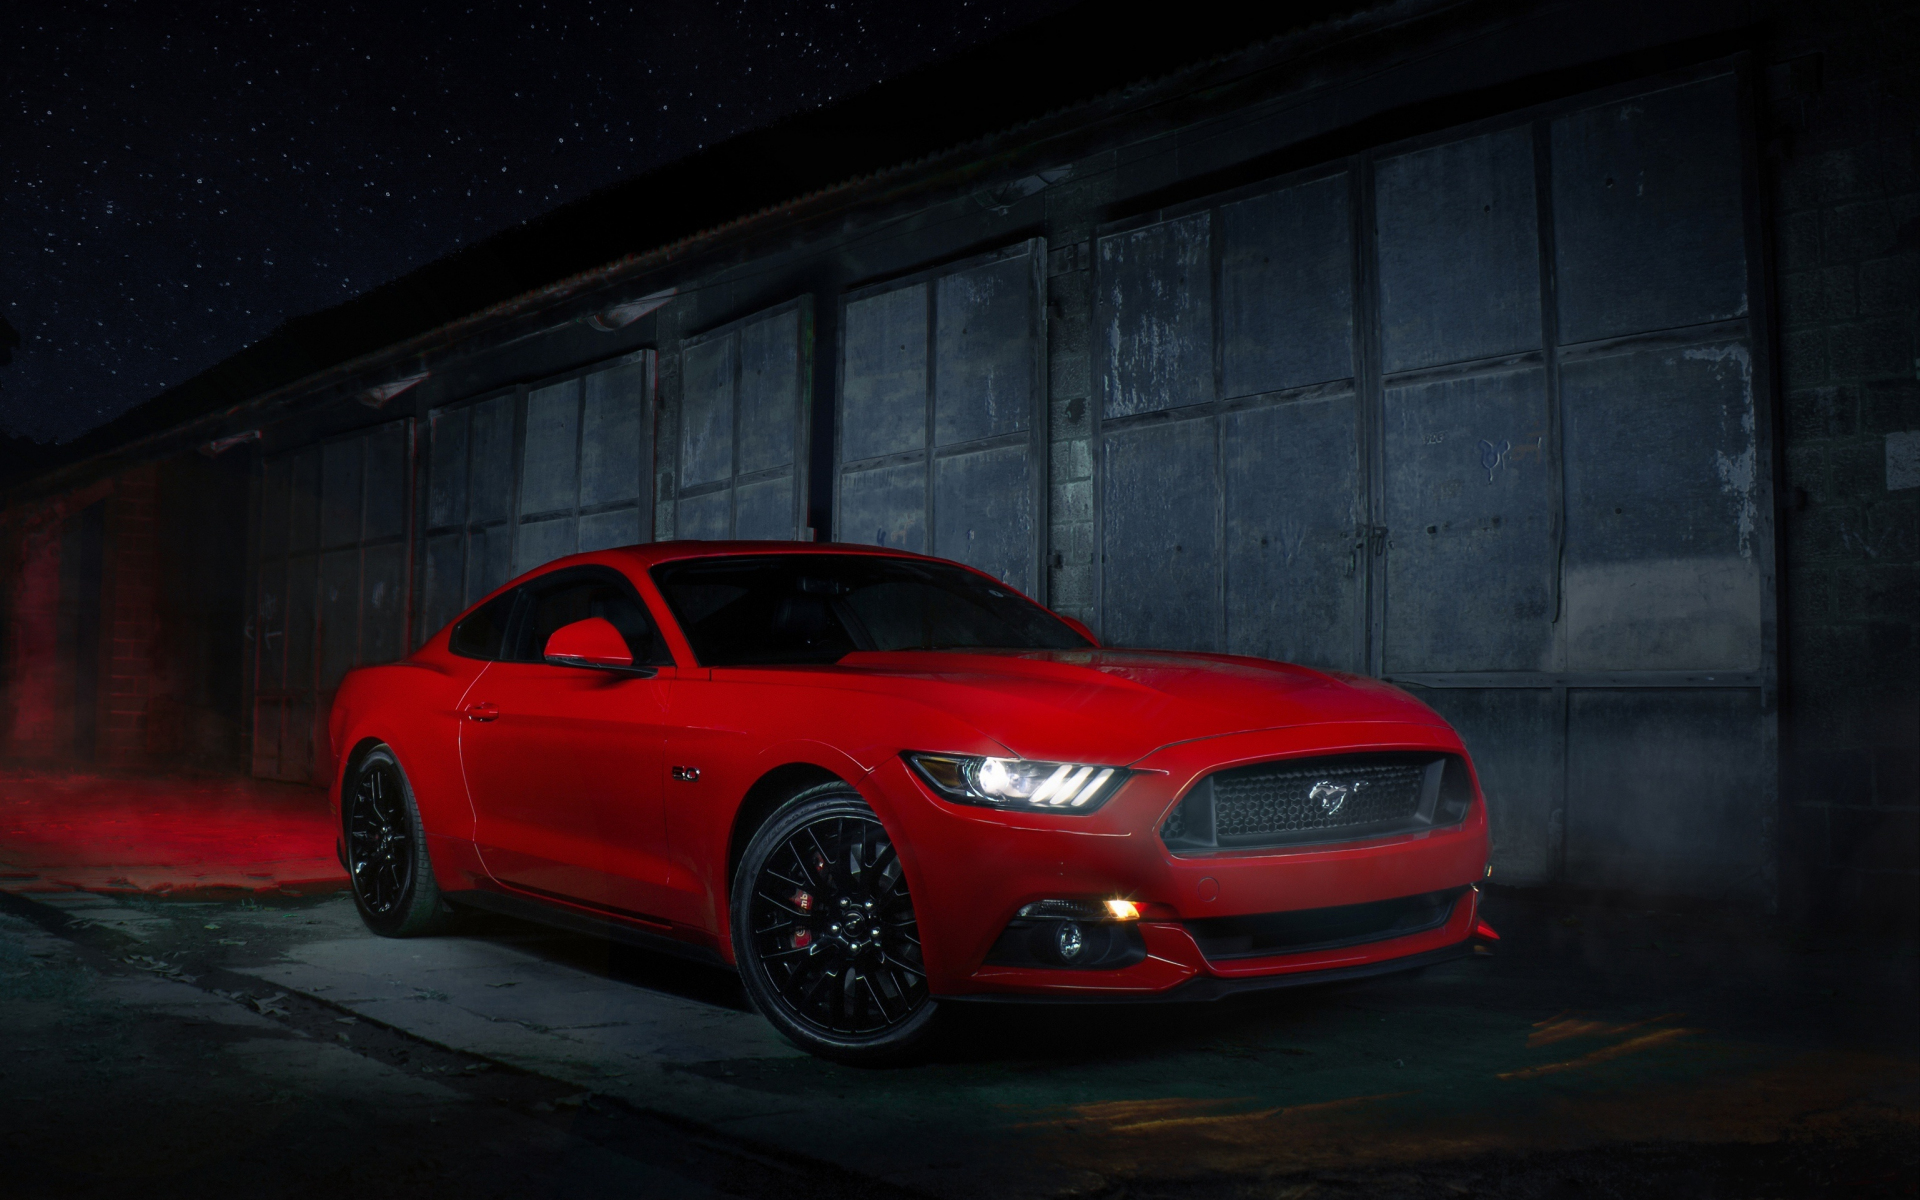 Download wallpaper 1920x1200 red ford mustang, 2019, 16:10 widescreen ...